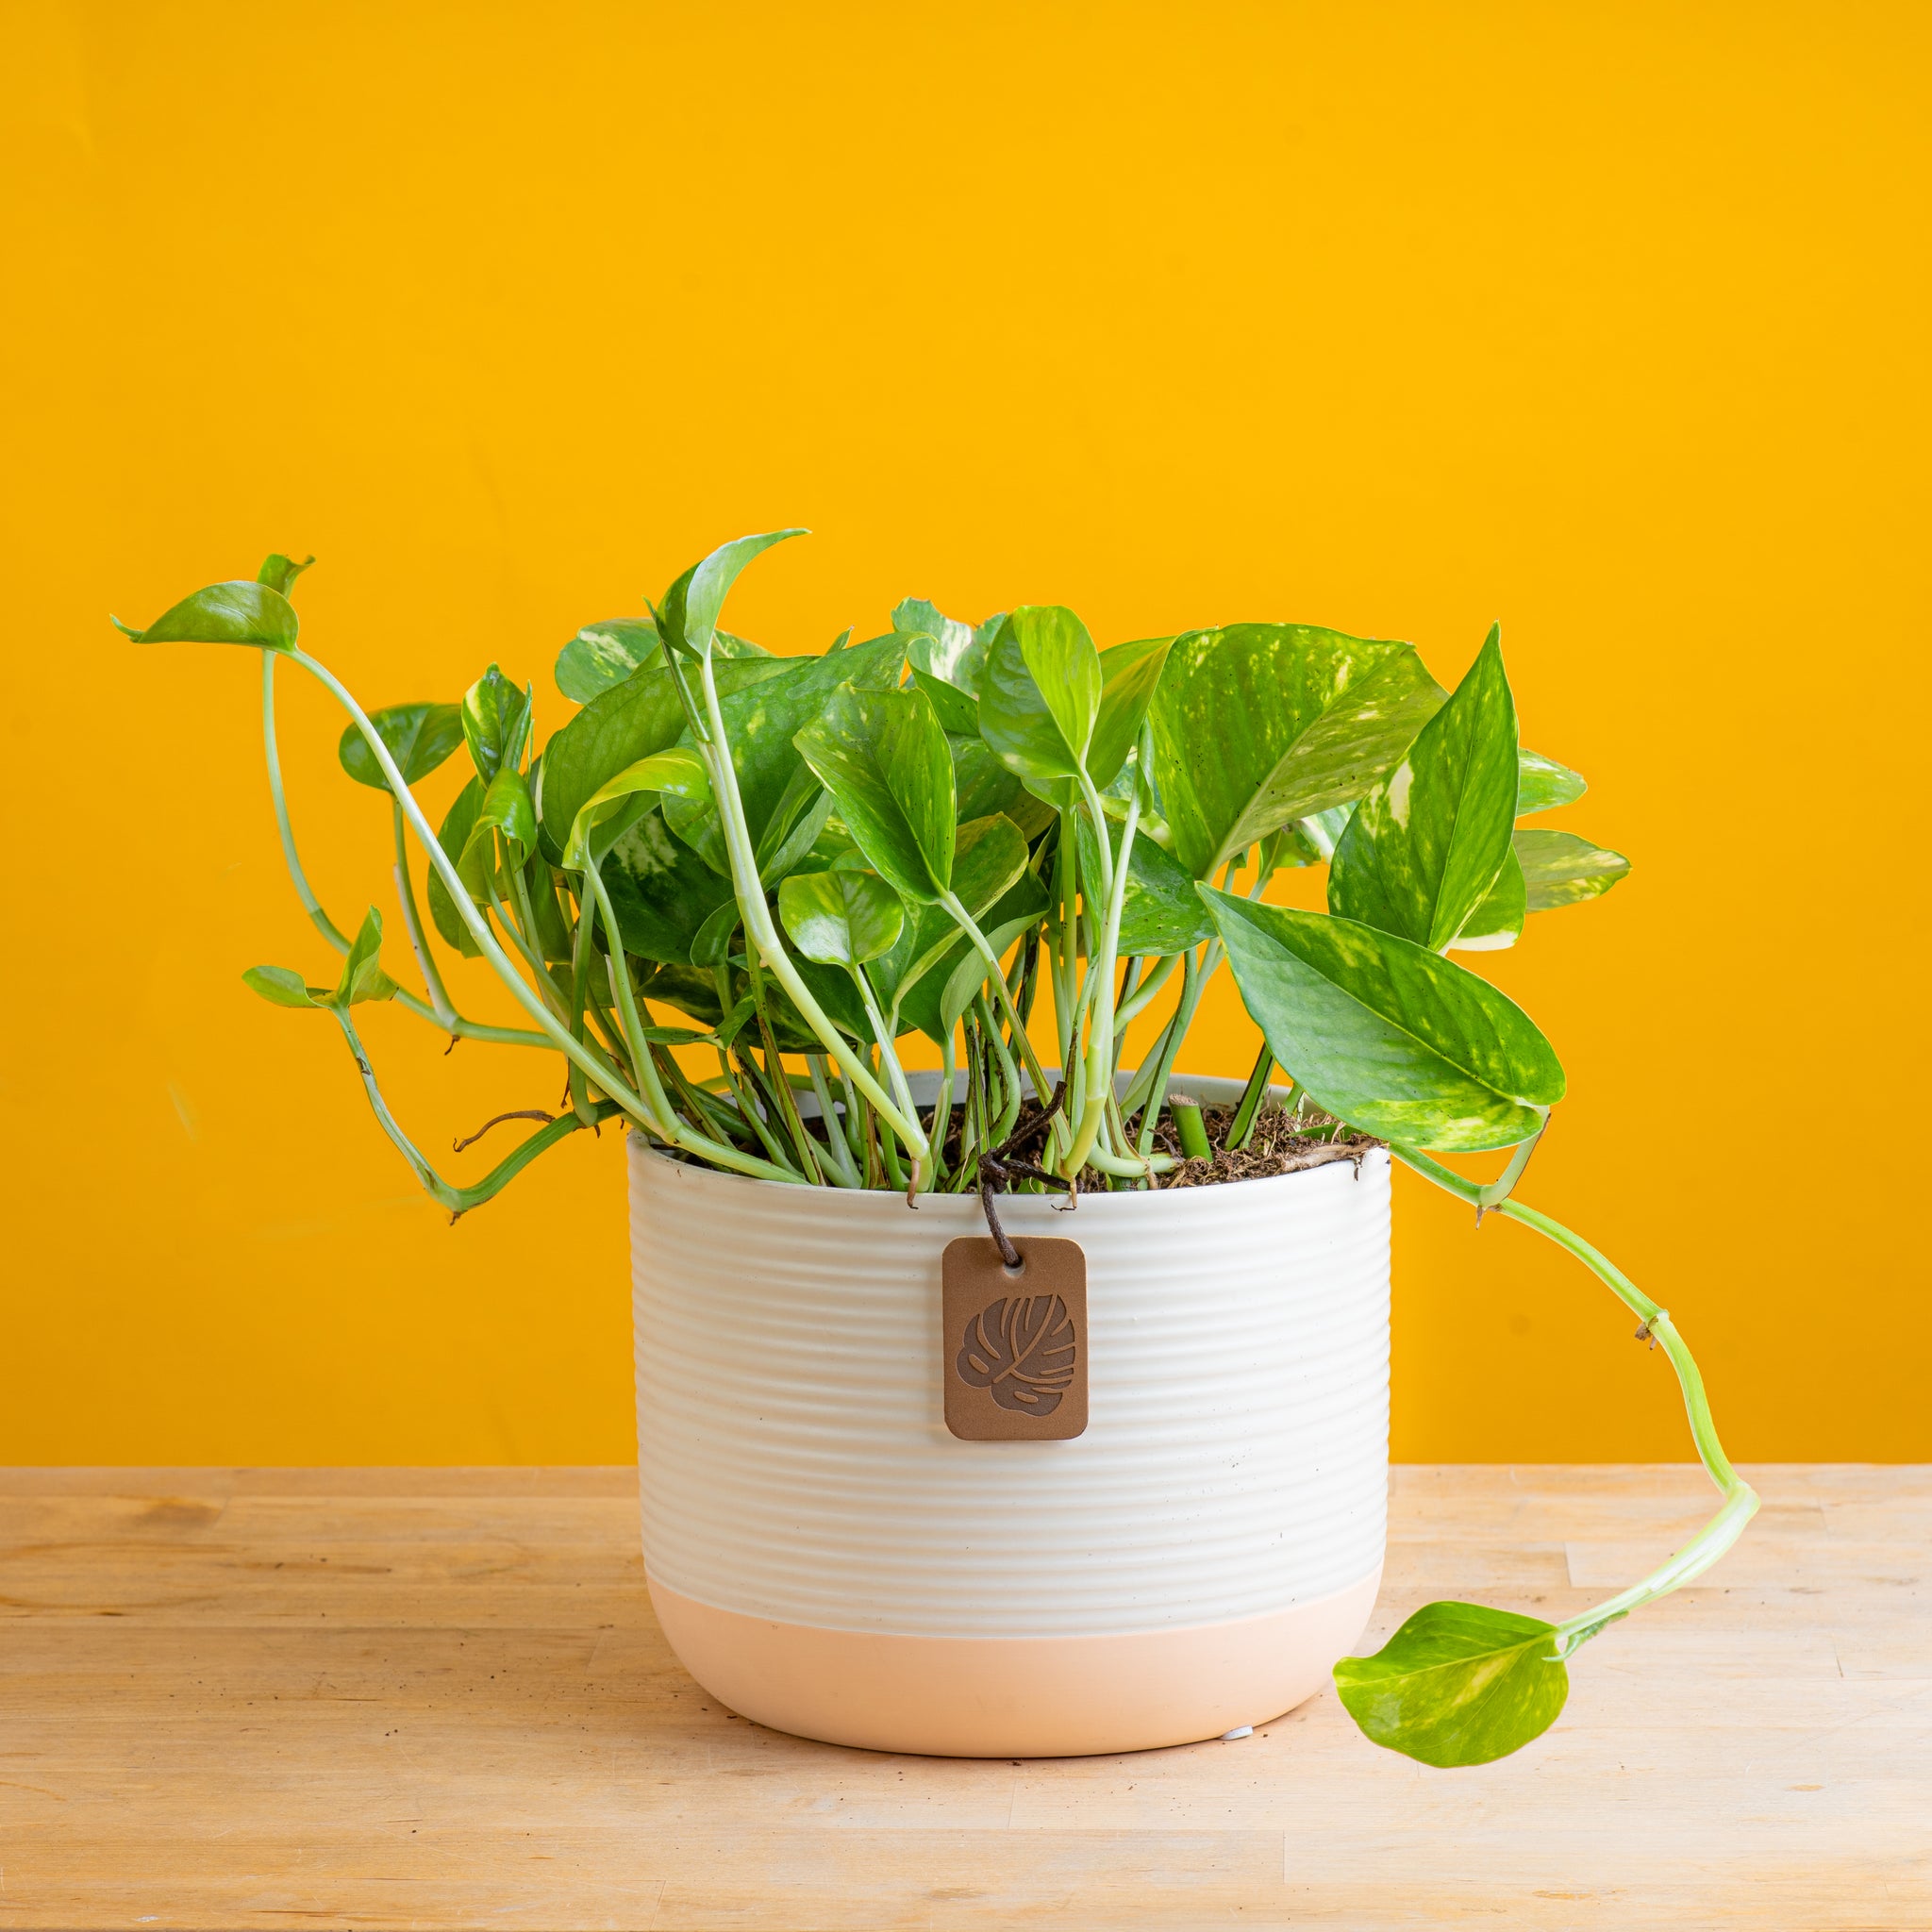 golden pothos in two tone cream pot set against a bright yellow background